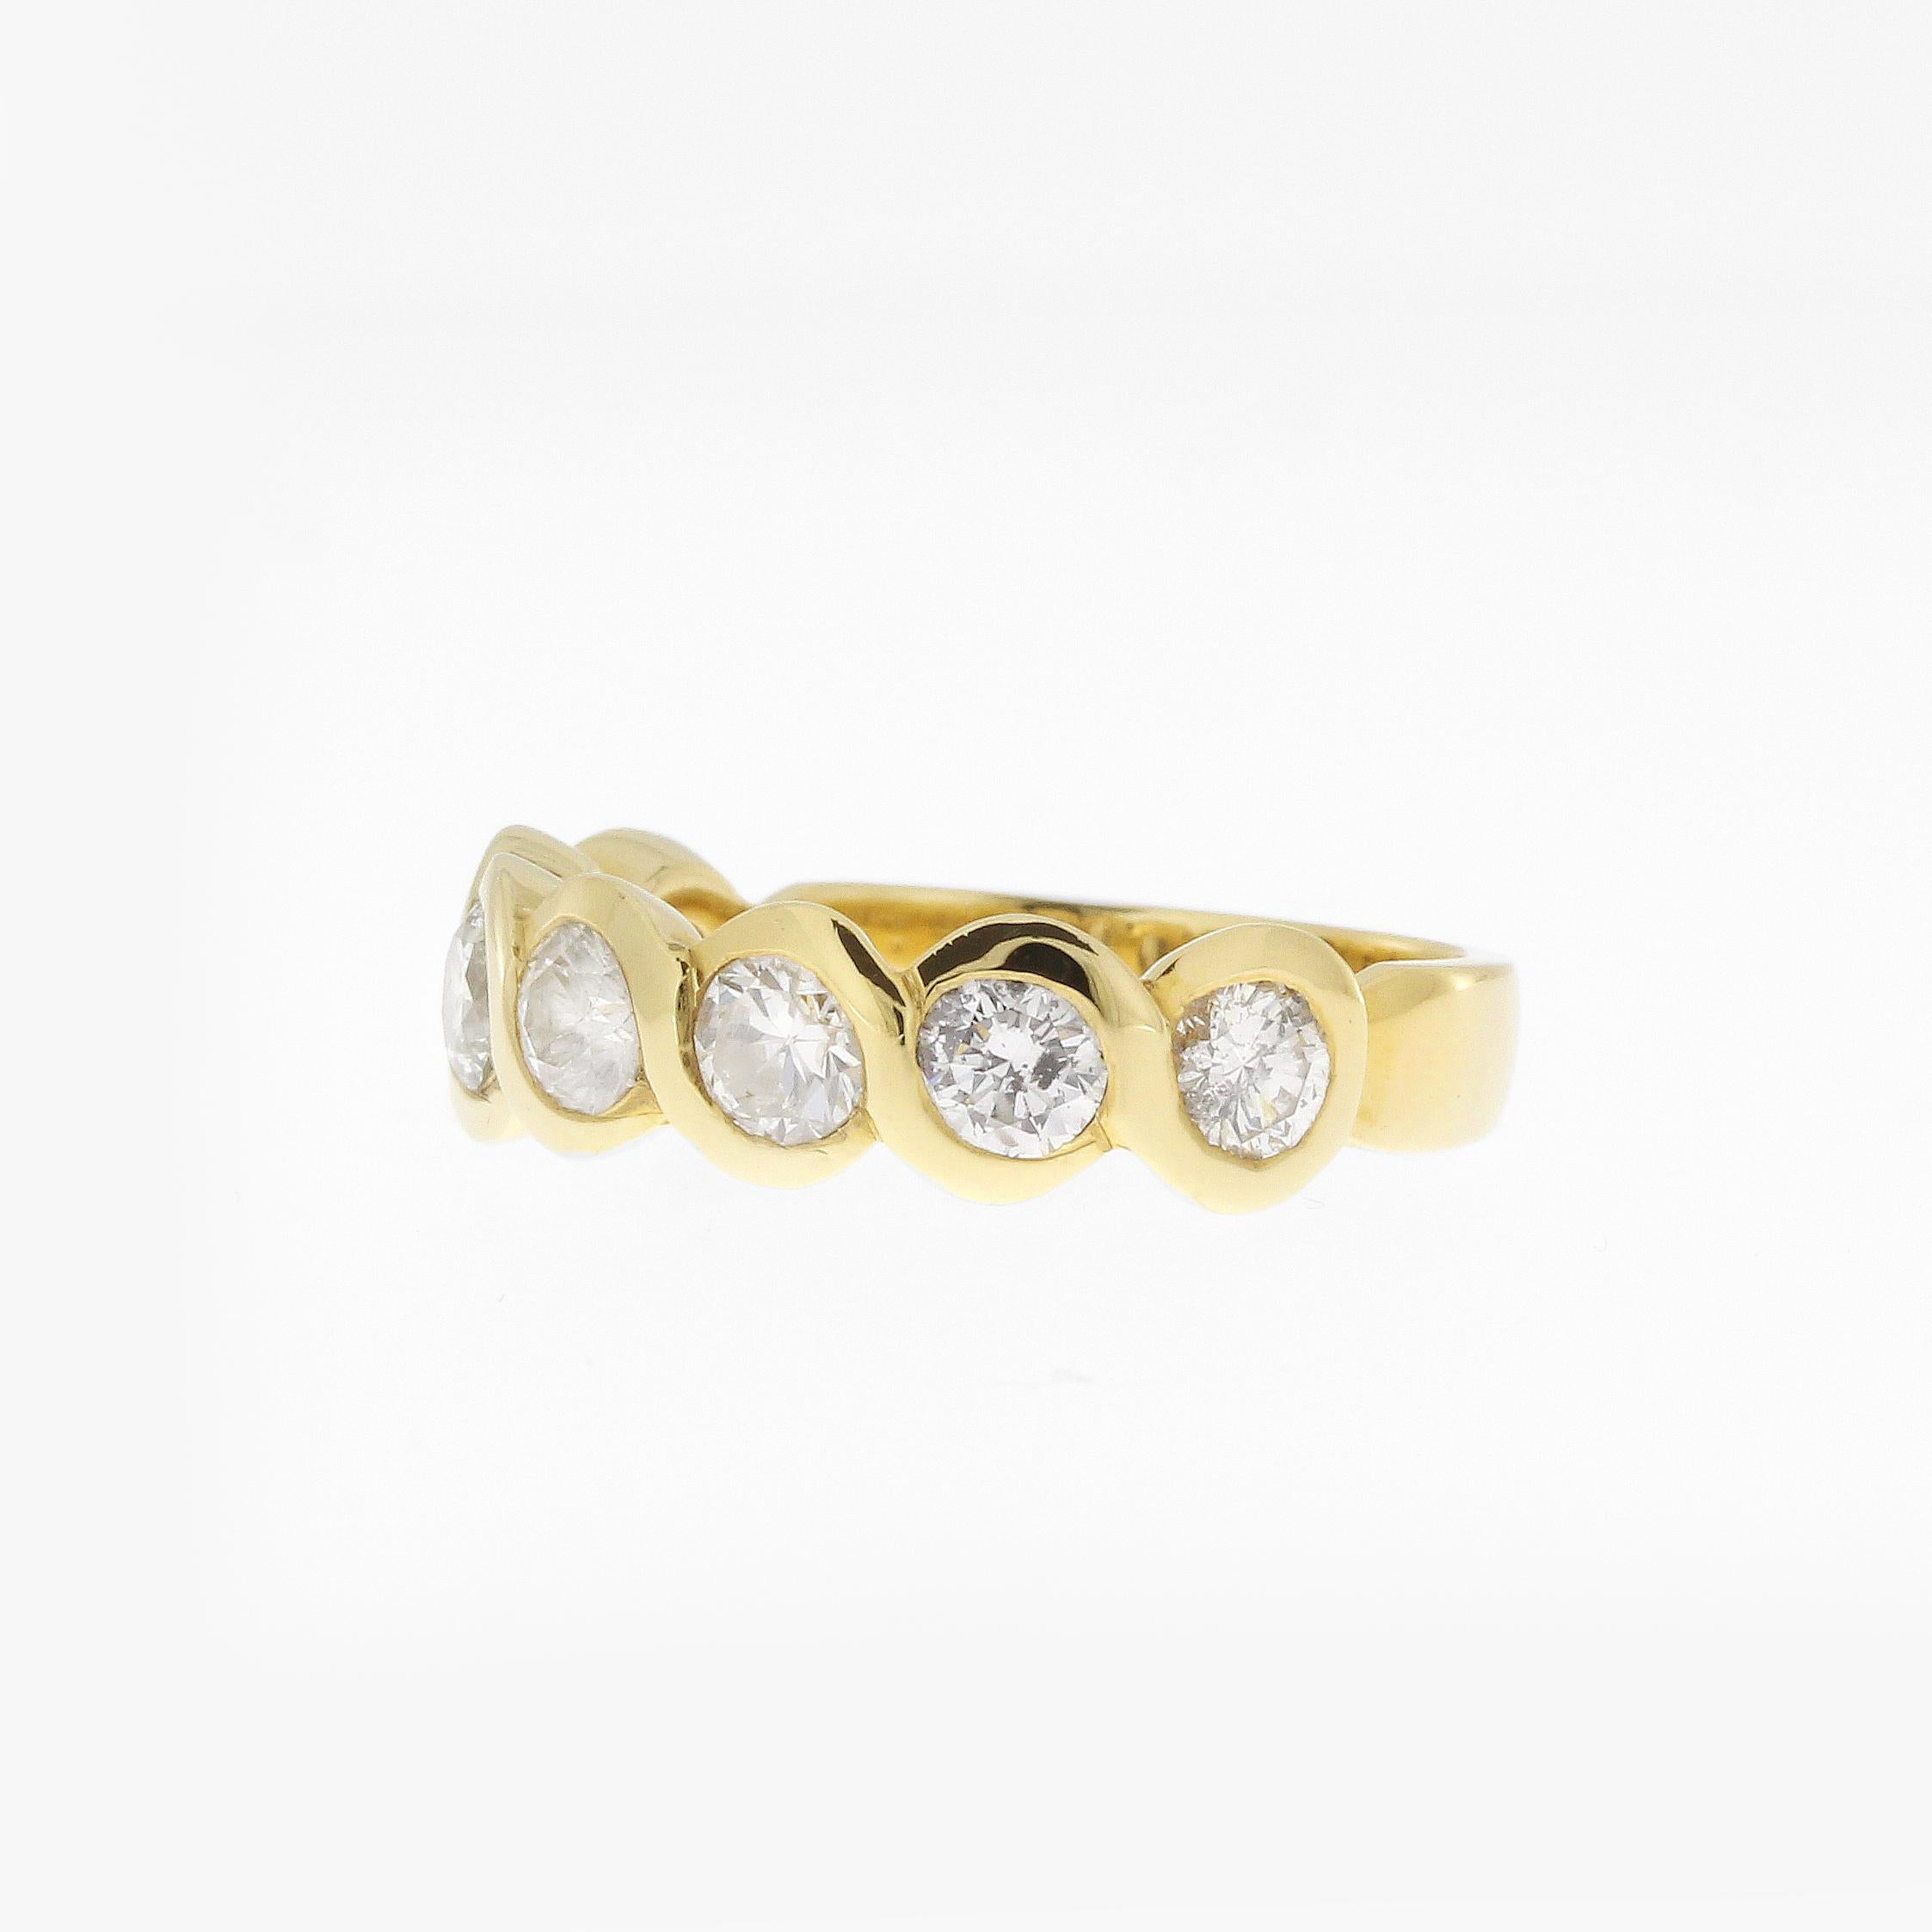 Vintage Yellow Gold Half Eternity Band Ring with 7 Brilliant Cut Diamonds.
Clarity: si2-i1